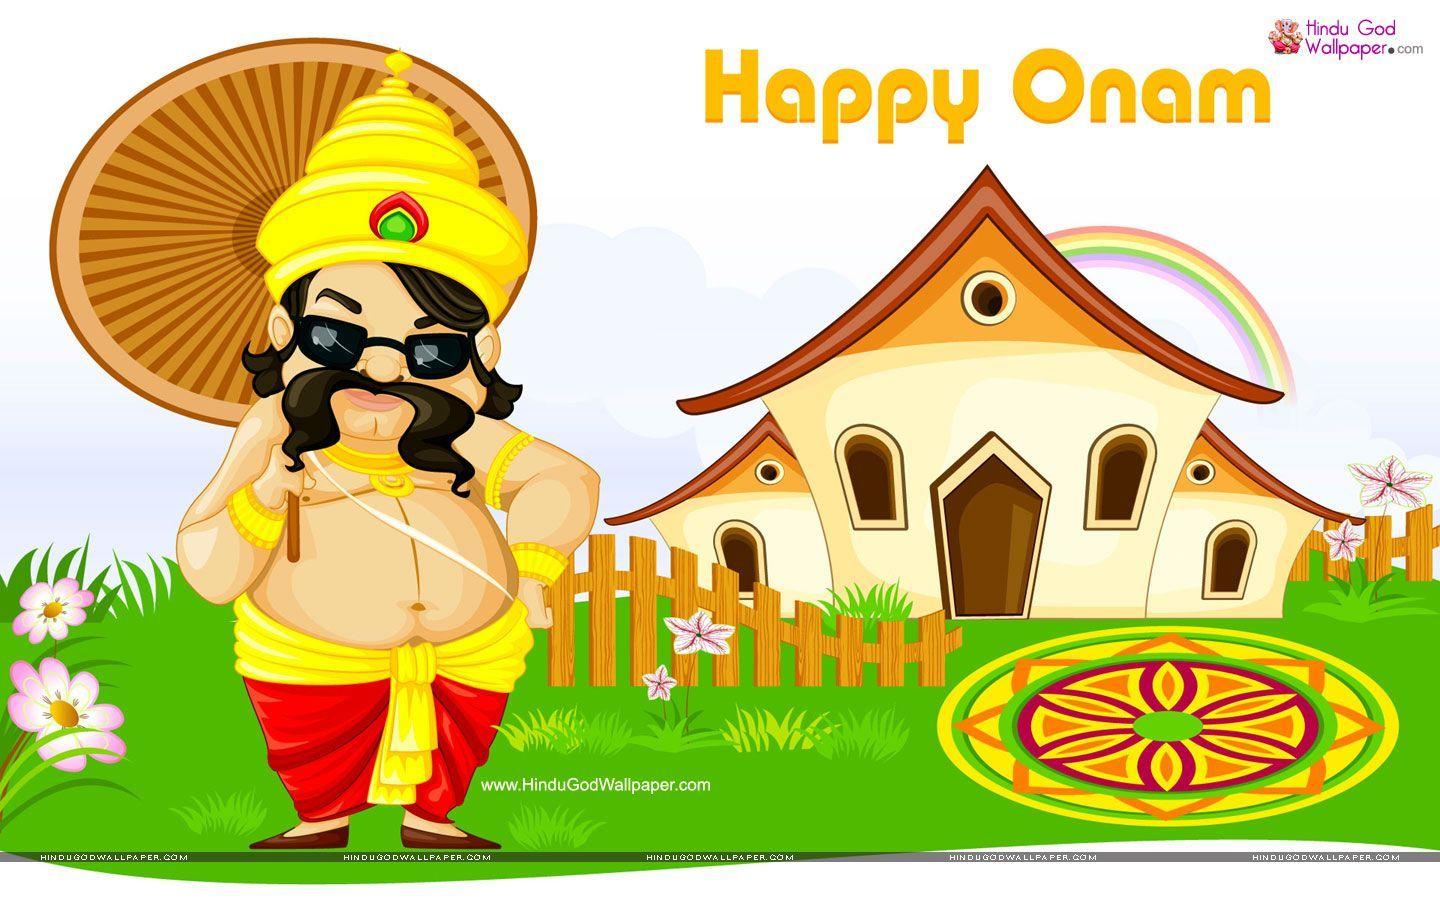 Onam Picture Greetings & Wishes Wallpaper Download. Onam